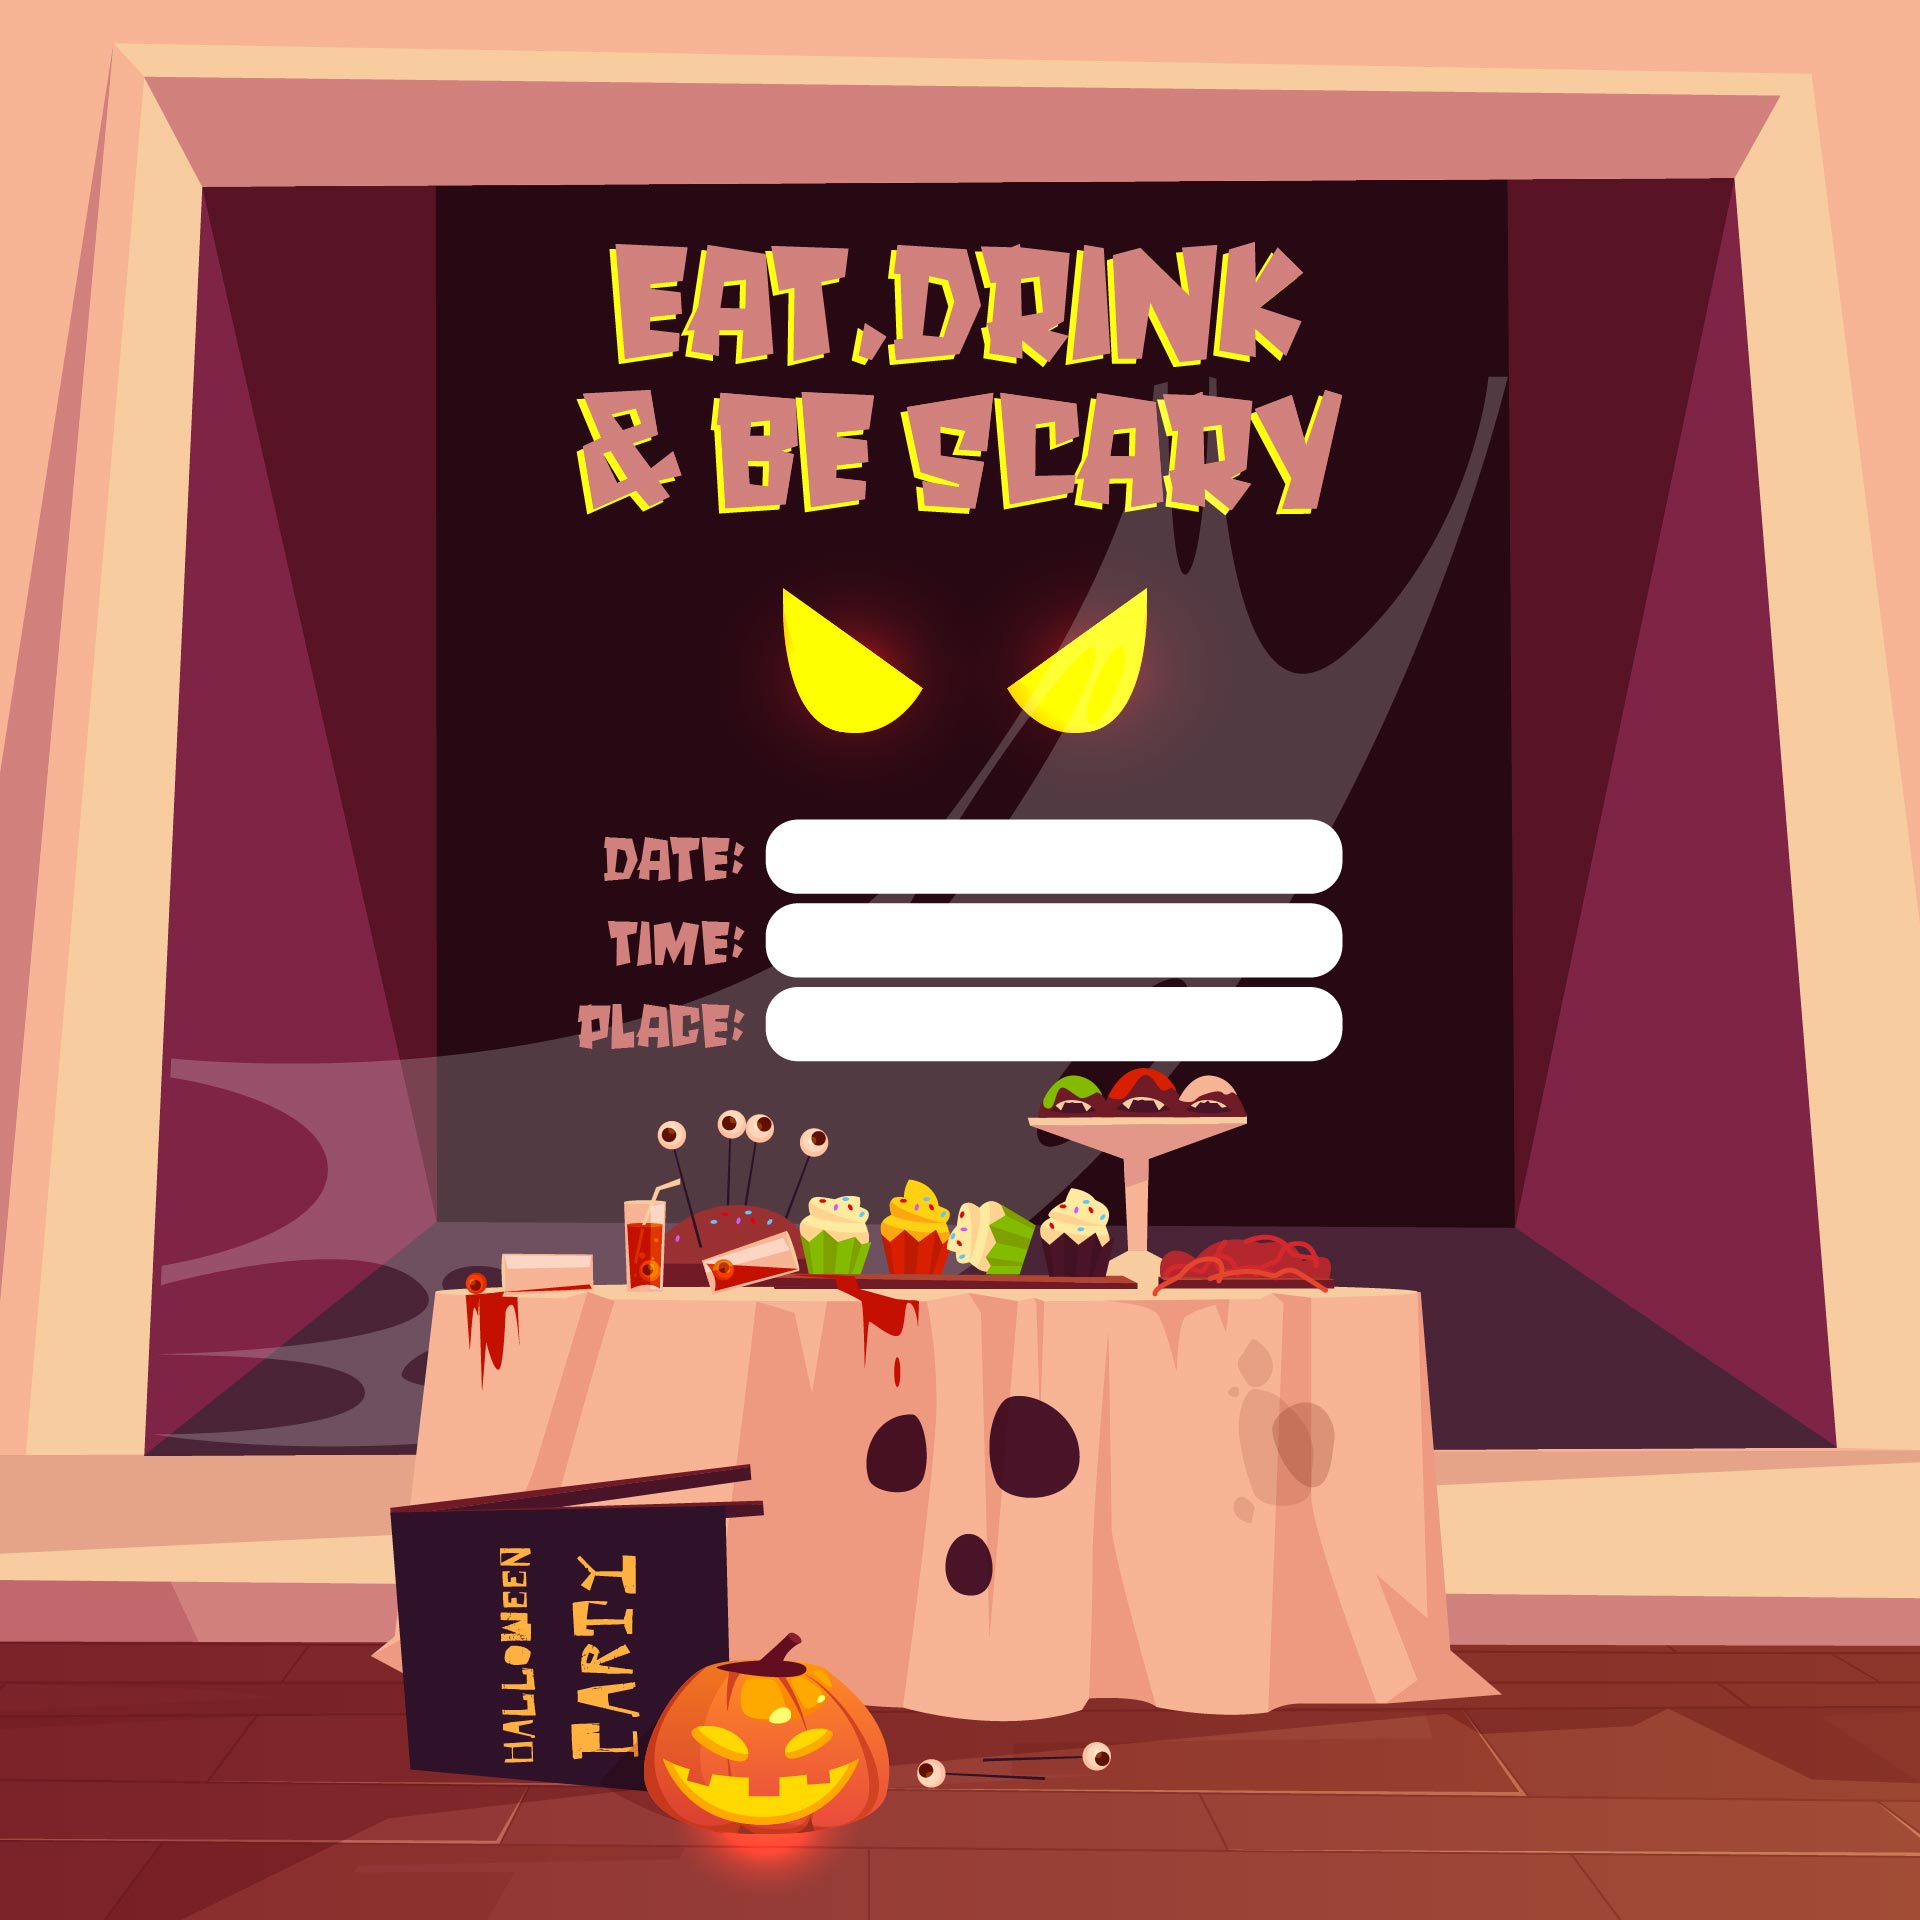 Eat Drink Be Scary Invite Invitation Templates